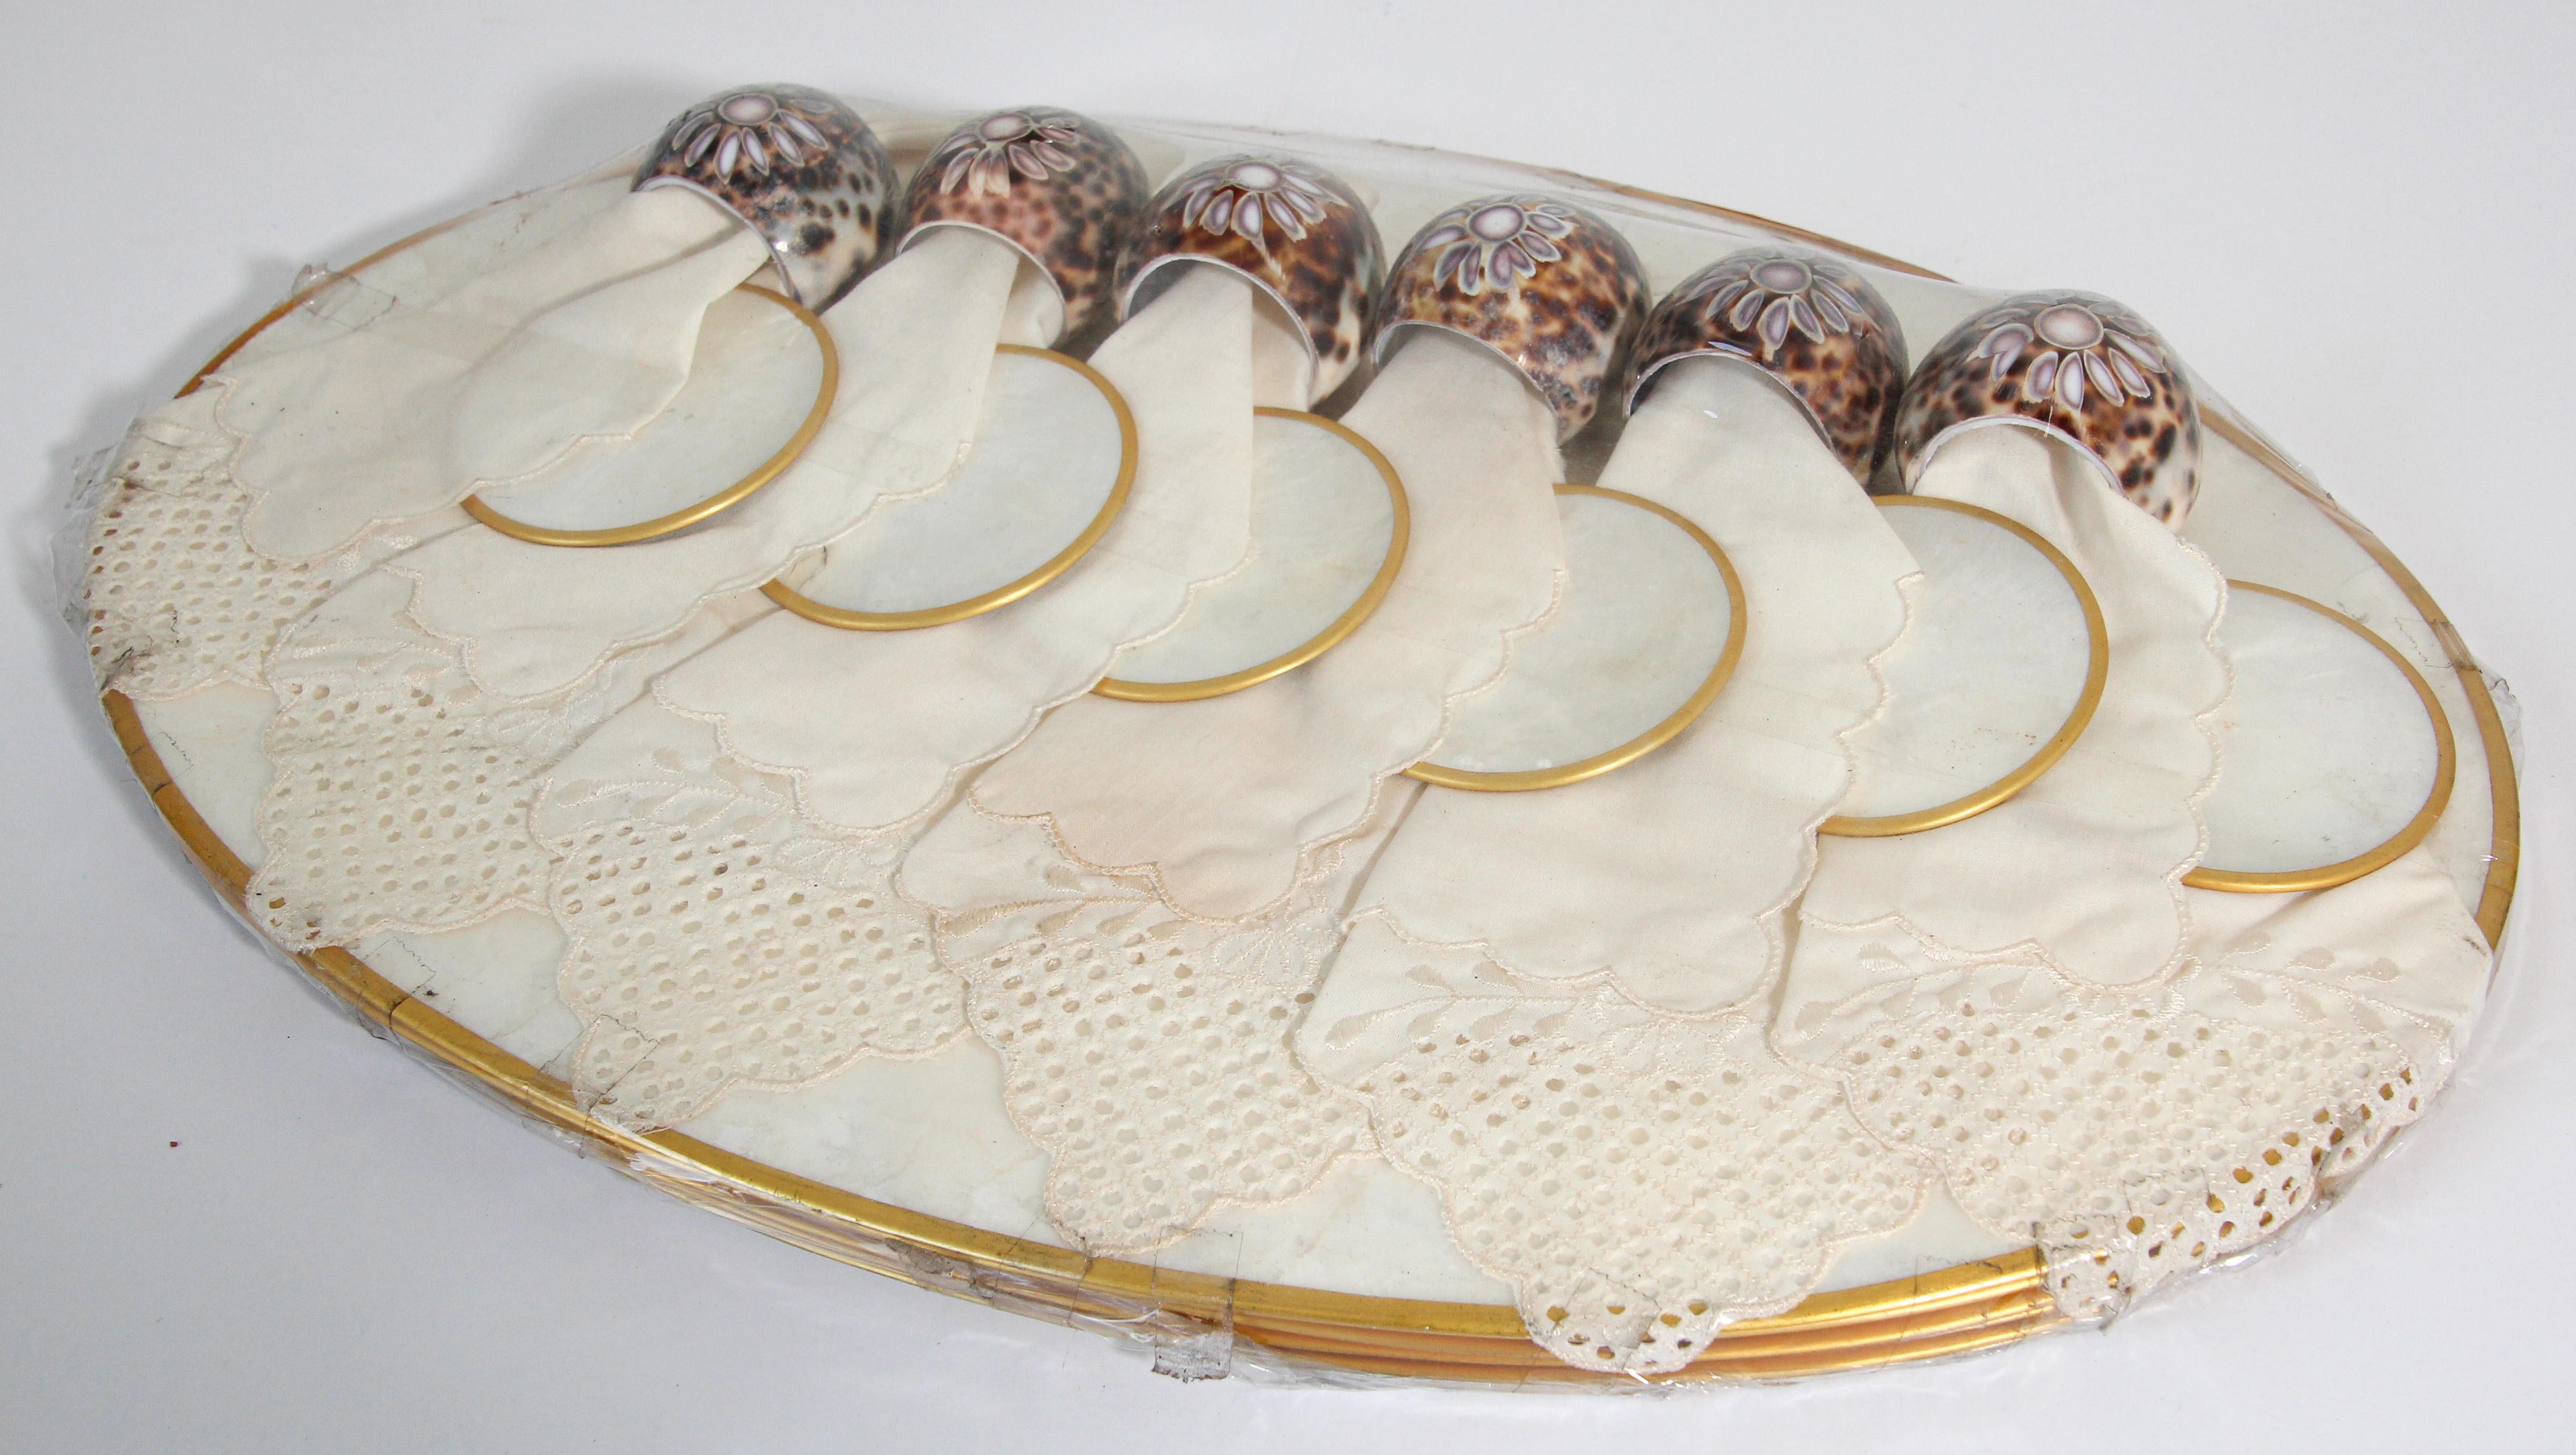 Hand-Crafted Vintage Hallie St Mary Placemats Set in Natural Capiz Pearl Shell